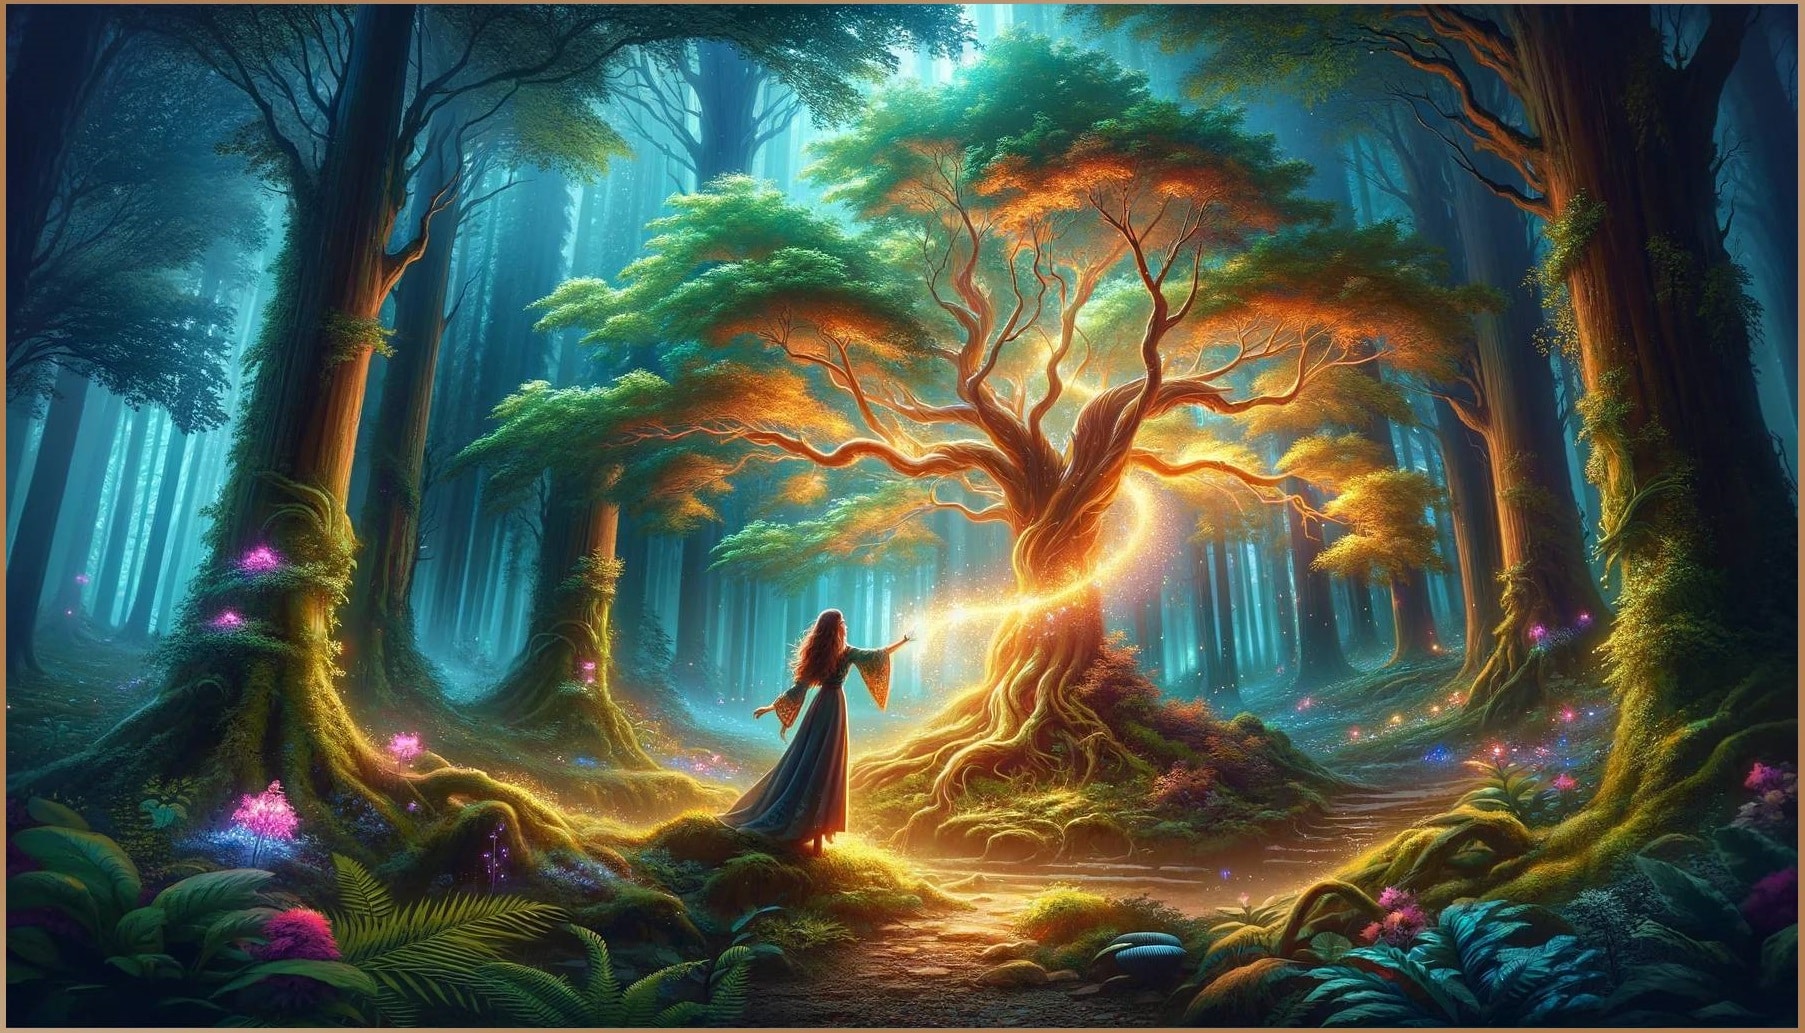 A woman in a mystical forest reaching out to a radiant tree, symbolizing a deep spiritual connection with nature's protective and enlightening plant spirit.